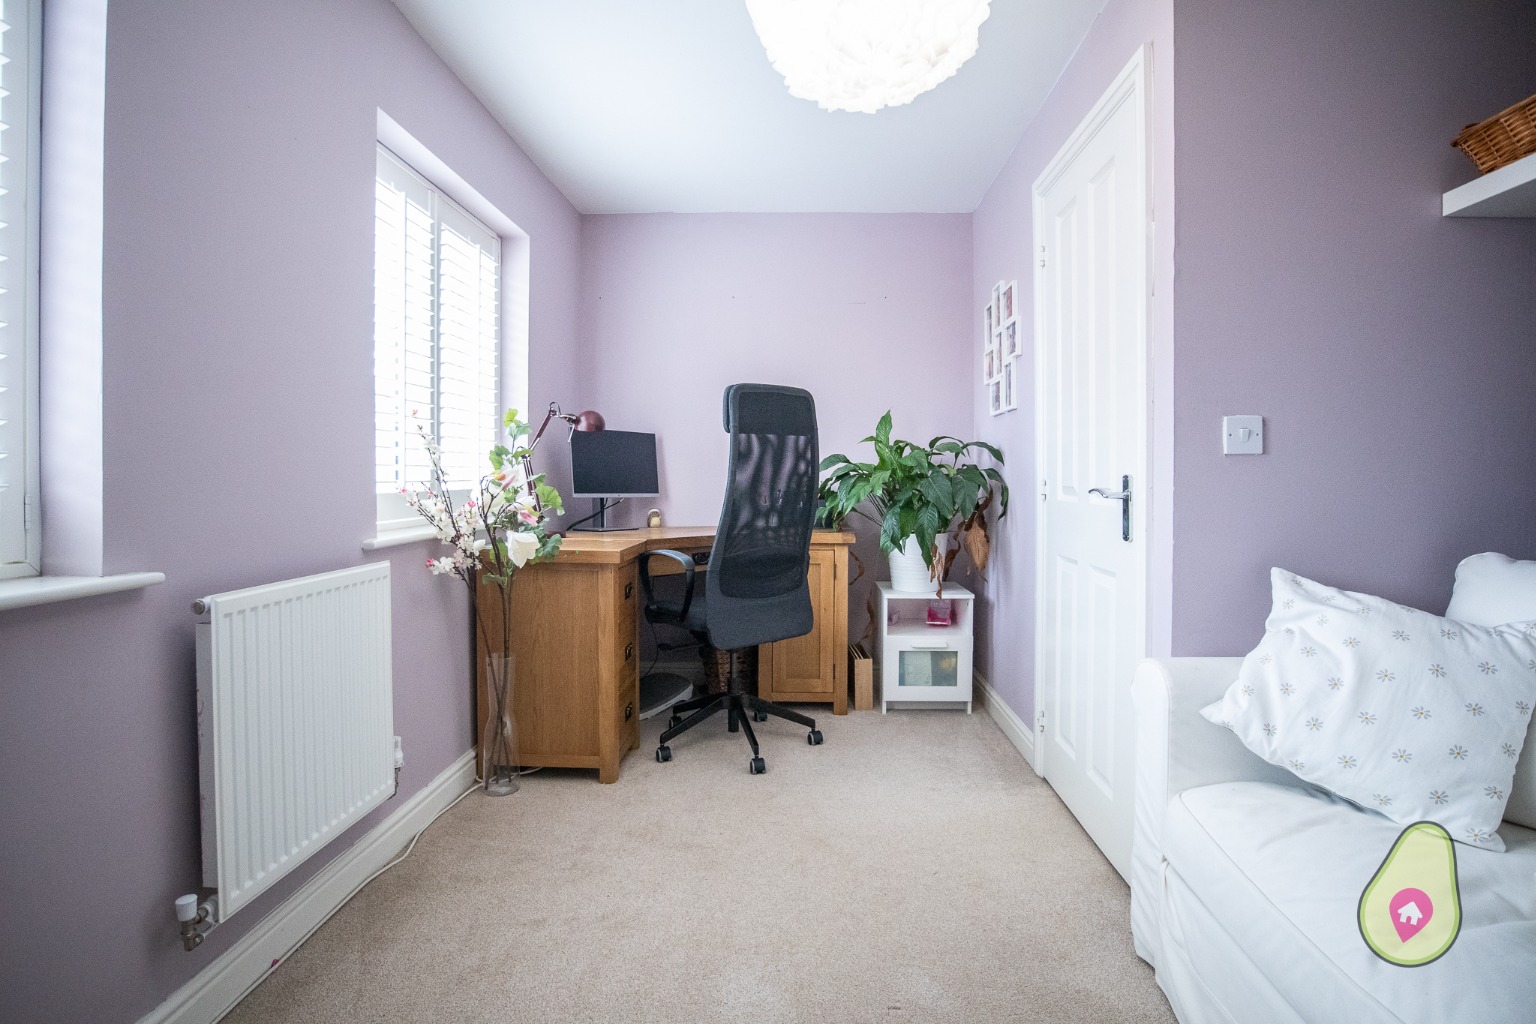 4 bed terraced house for sale in Cuckoo Lane, Bracknell  - Property Image 12